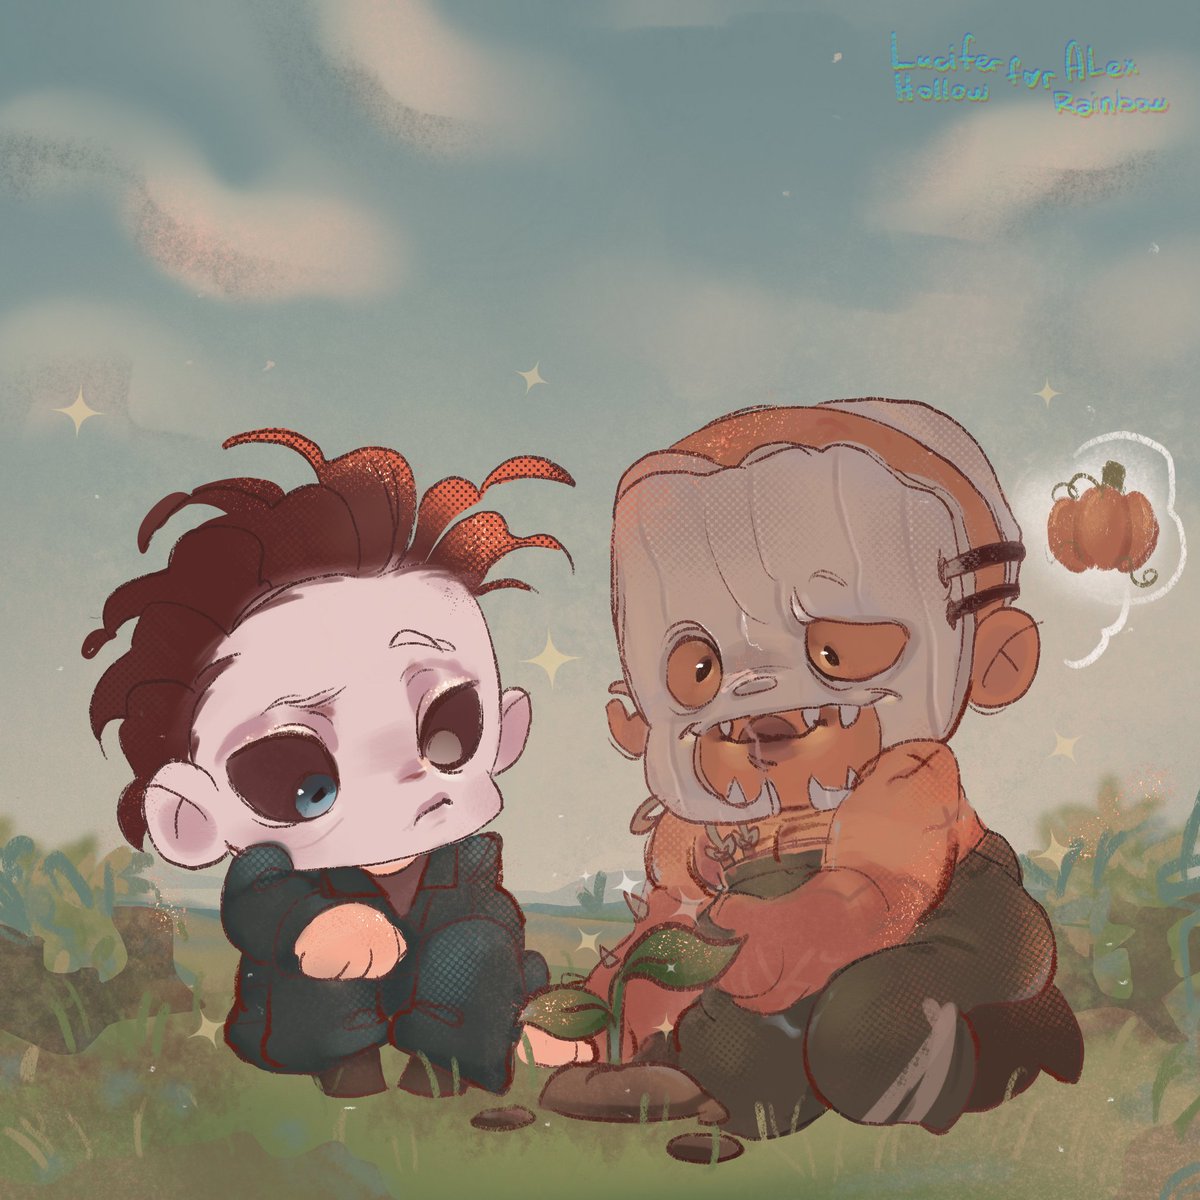 little cuties for my baby @alexrainbow13 💓🌿🎃
#deadbydaylight #dbd #deadbydaylightfanart #dbdfanart #evanmacmillan #thetrapper #halloween #michaelmyers #theshape #trape #macmyers #덫식 #トラシェイ